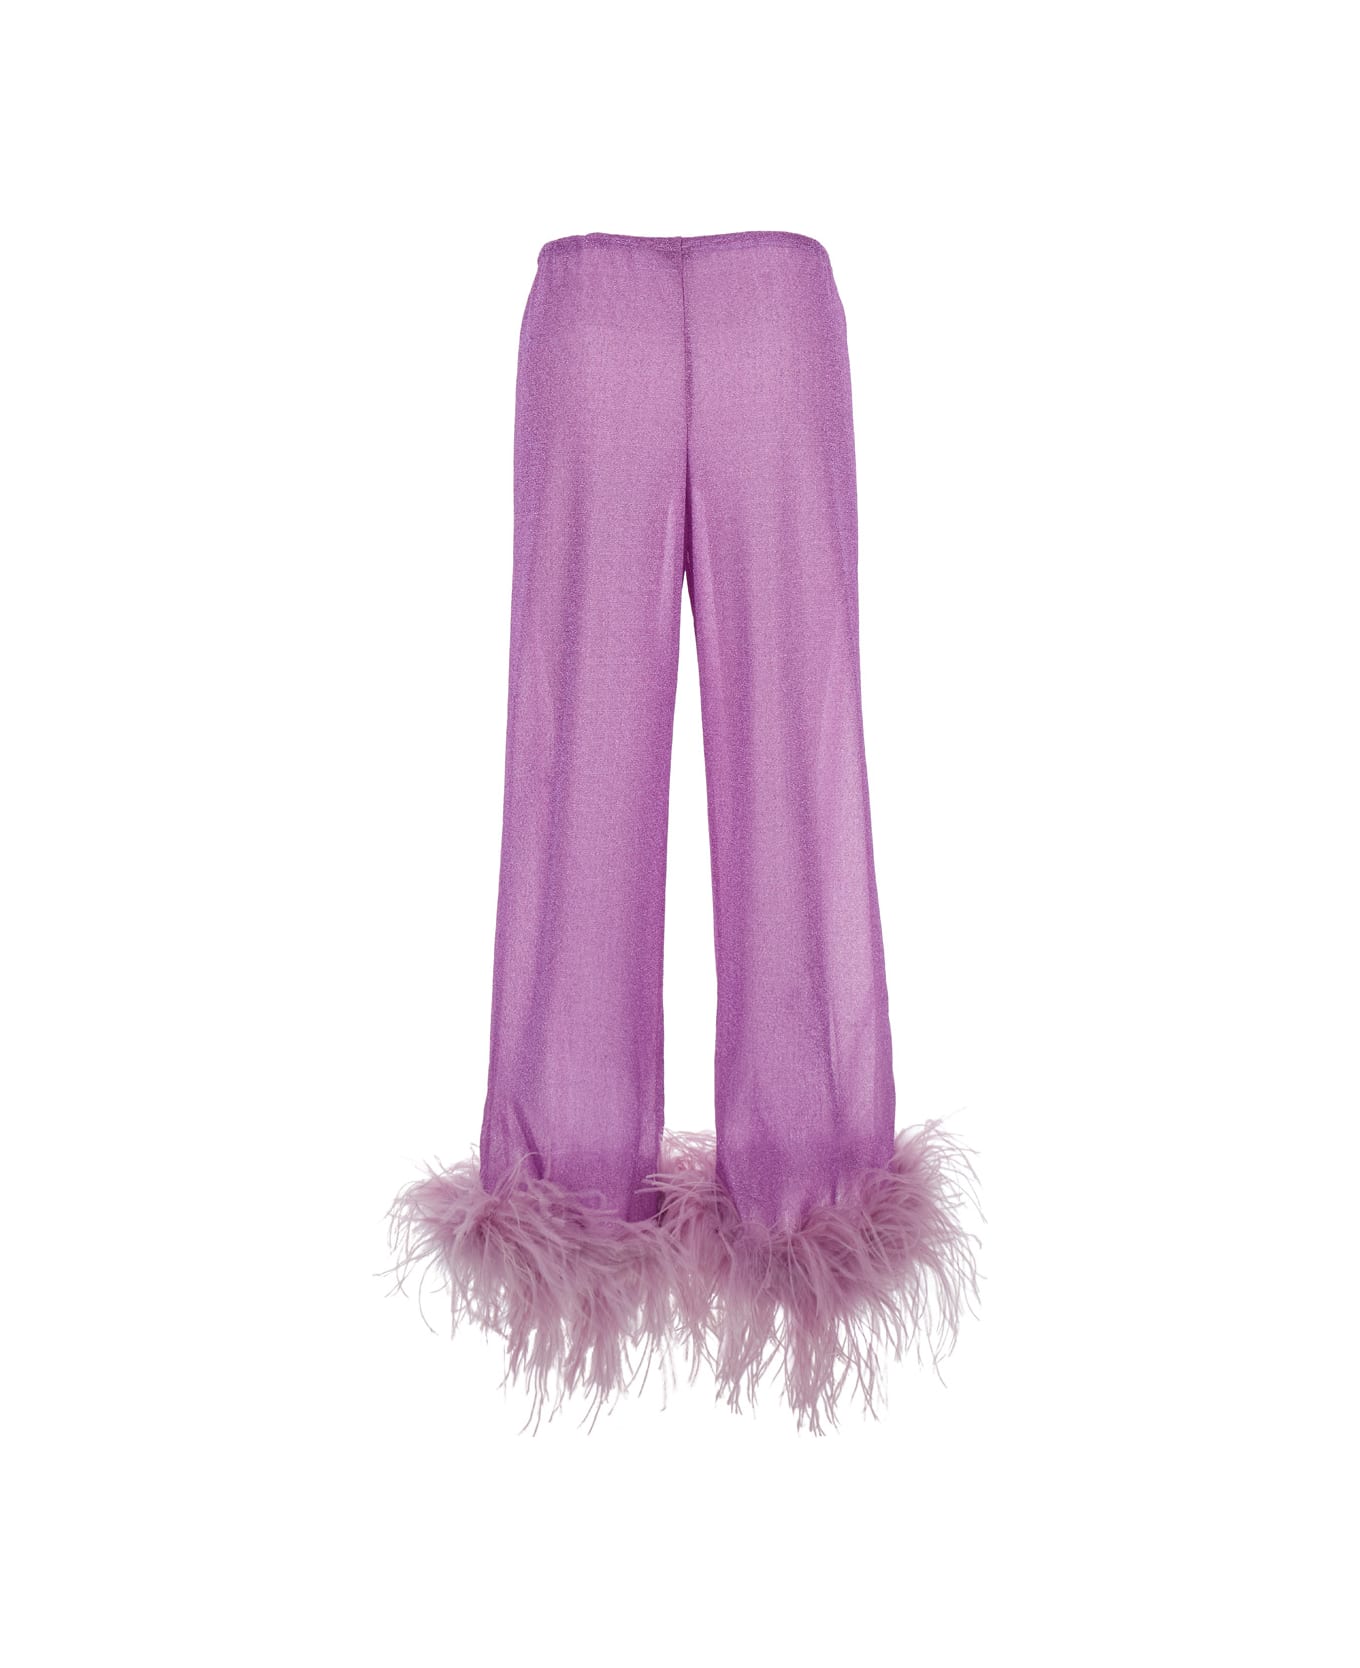 Oseree 'lumière Plumage' Violet Pants With Feathers And Drawstring In Polyamide Blend Woman - Violet ボトムス